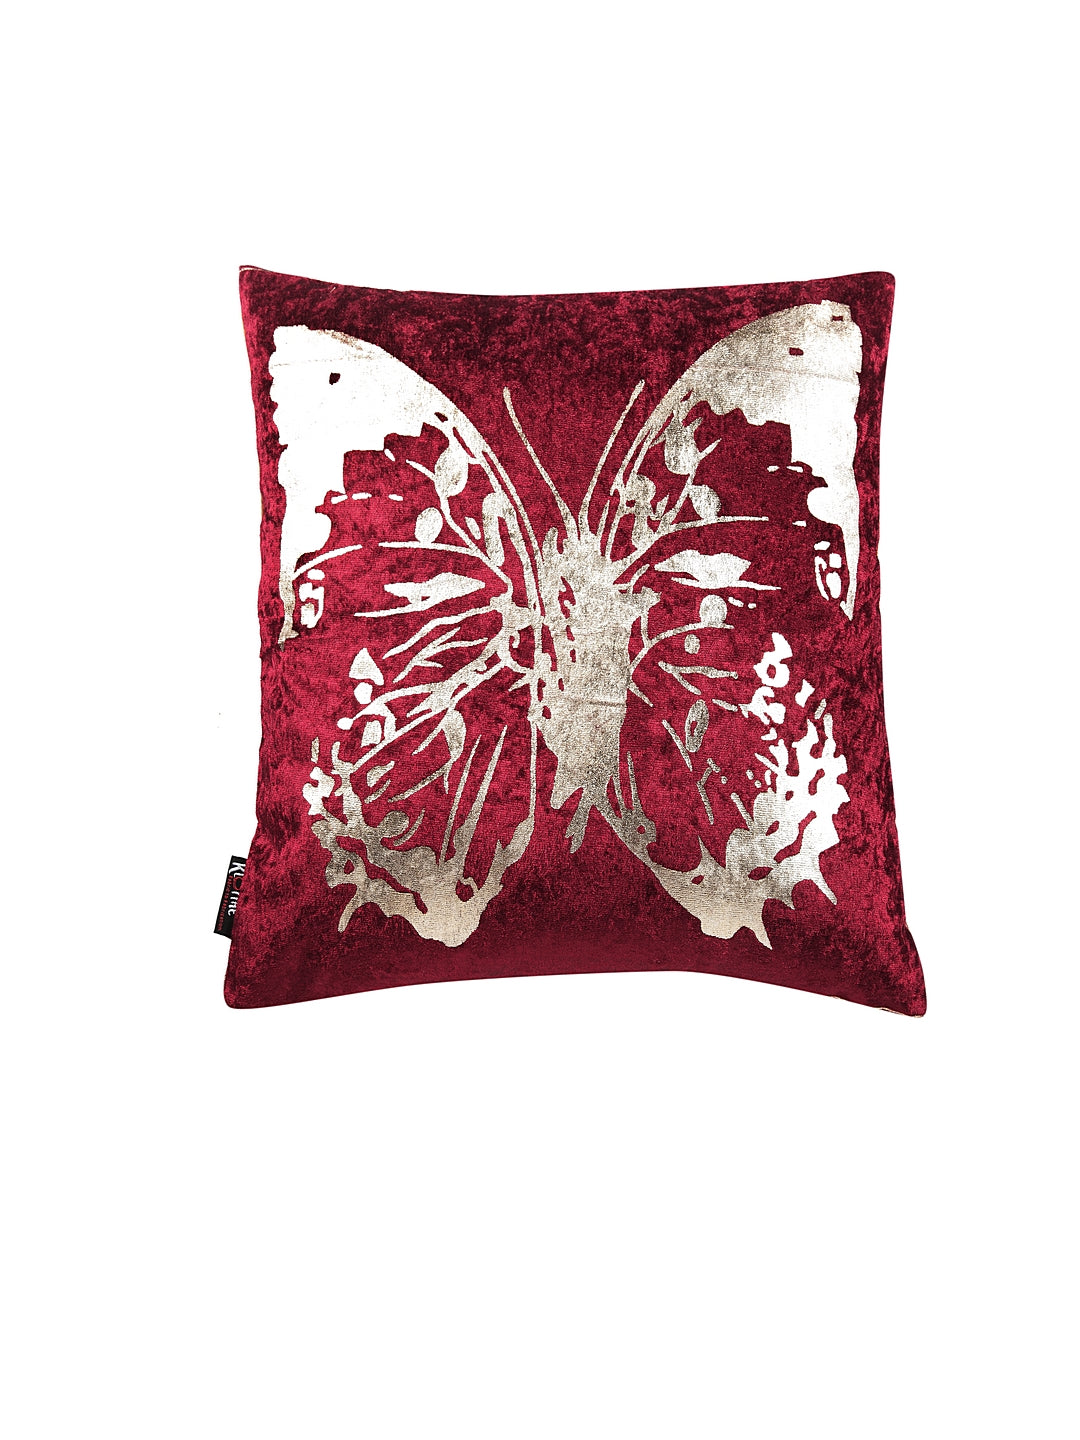 KLOTTHE Set of Five Maroon Poly Cotton Cushion Covers With Microfibre Fillers (40X40 cm)